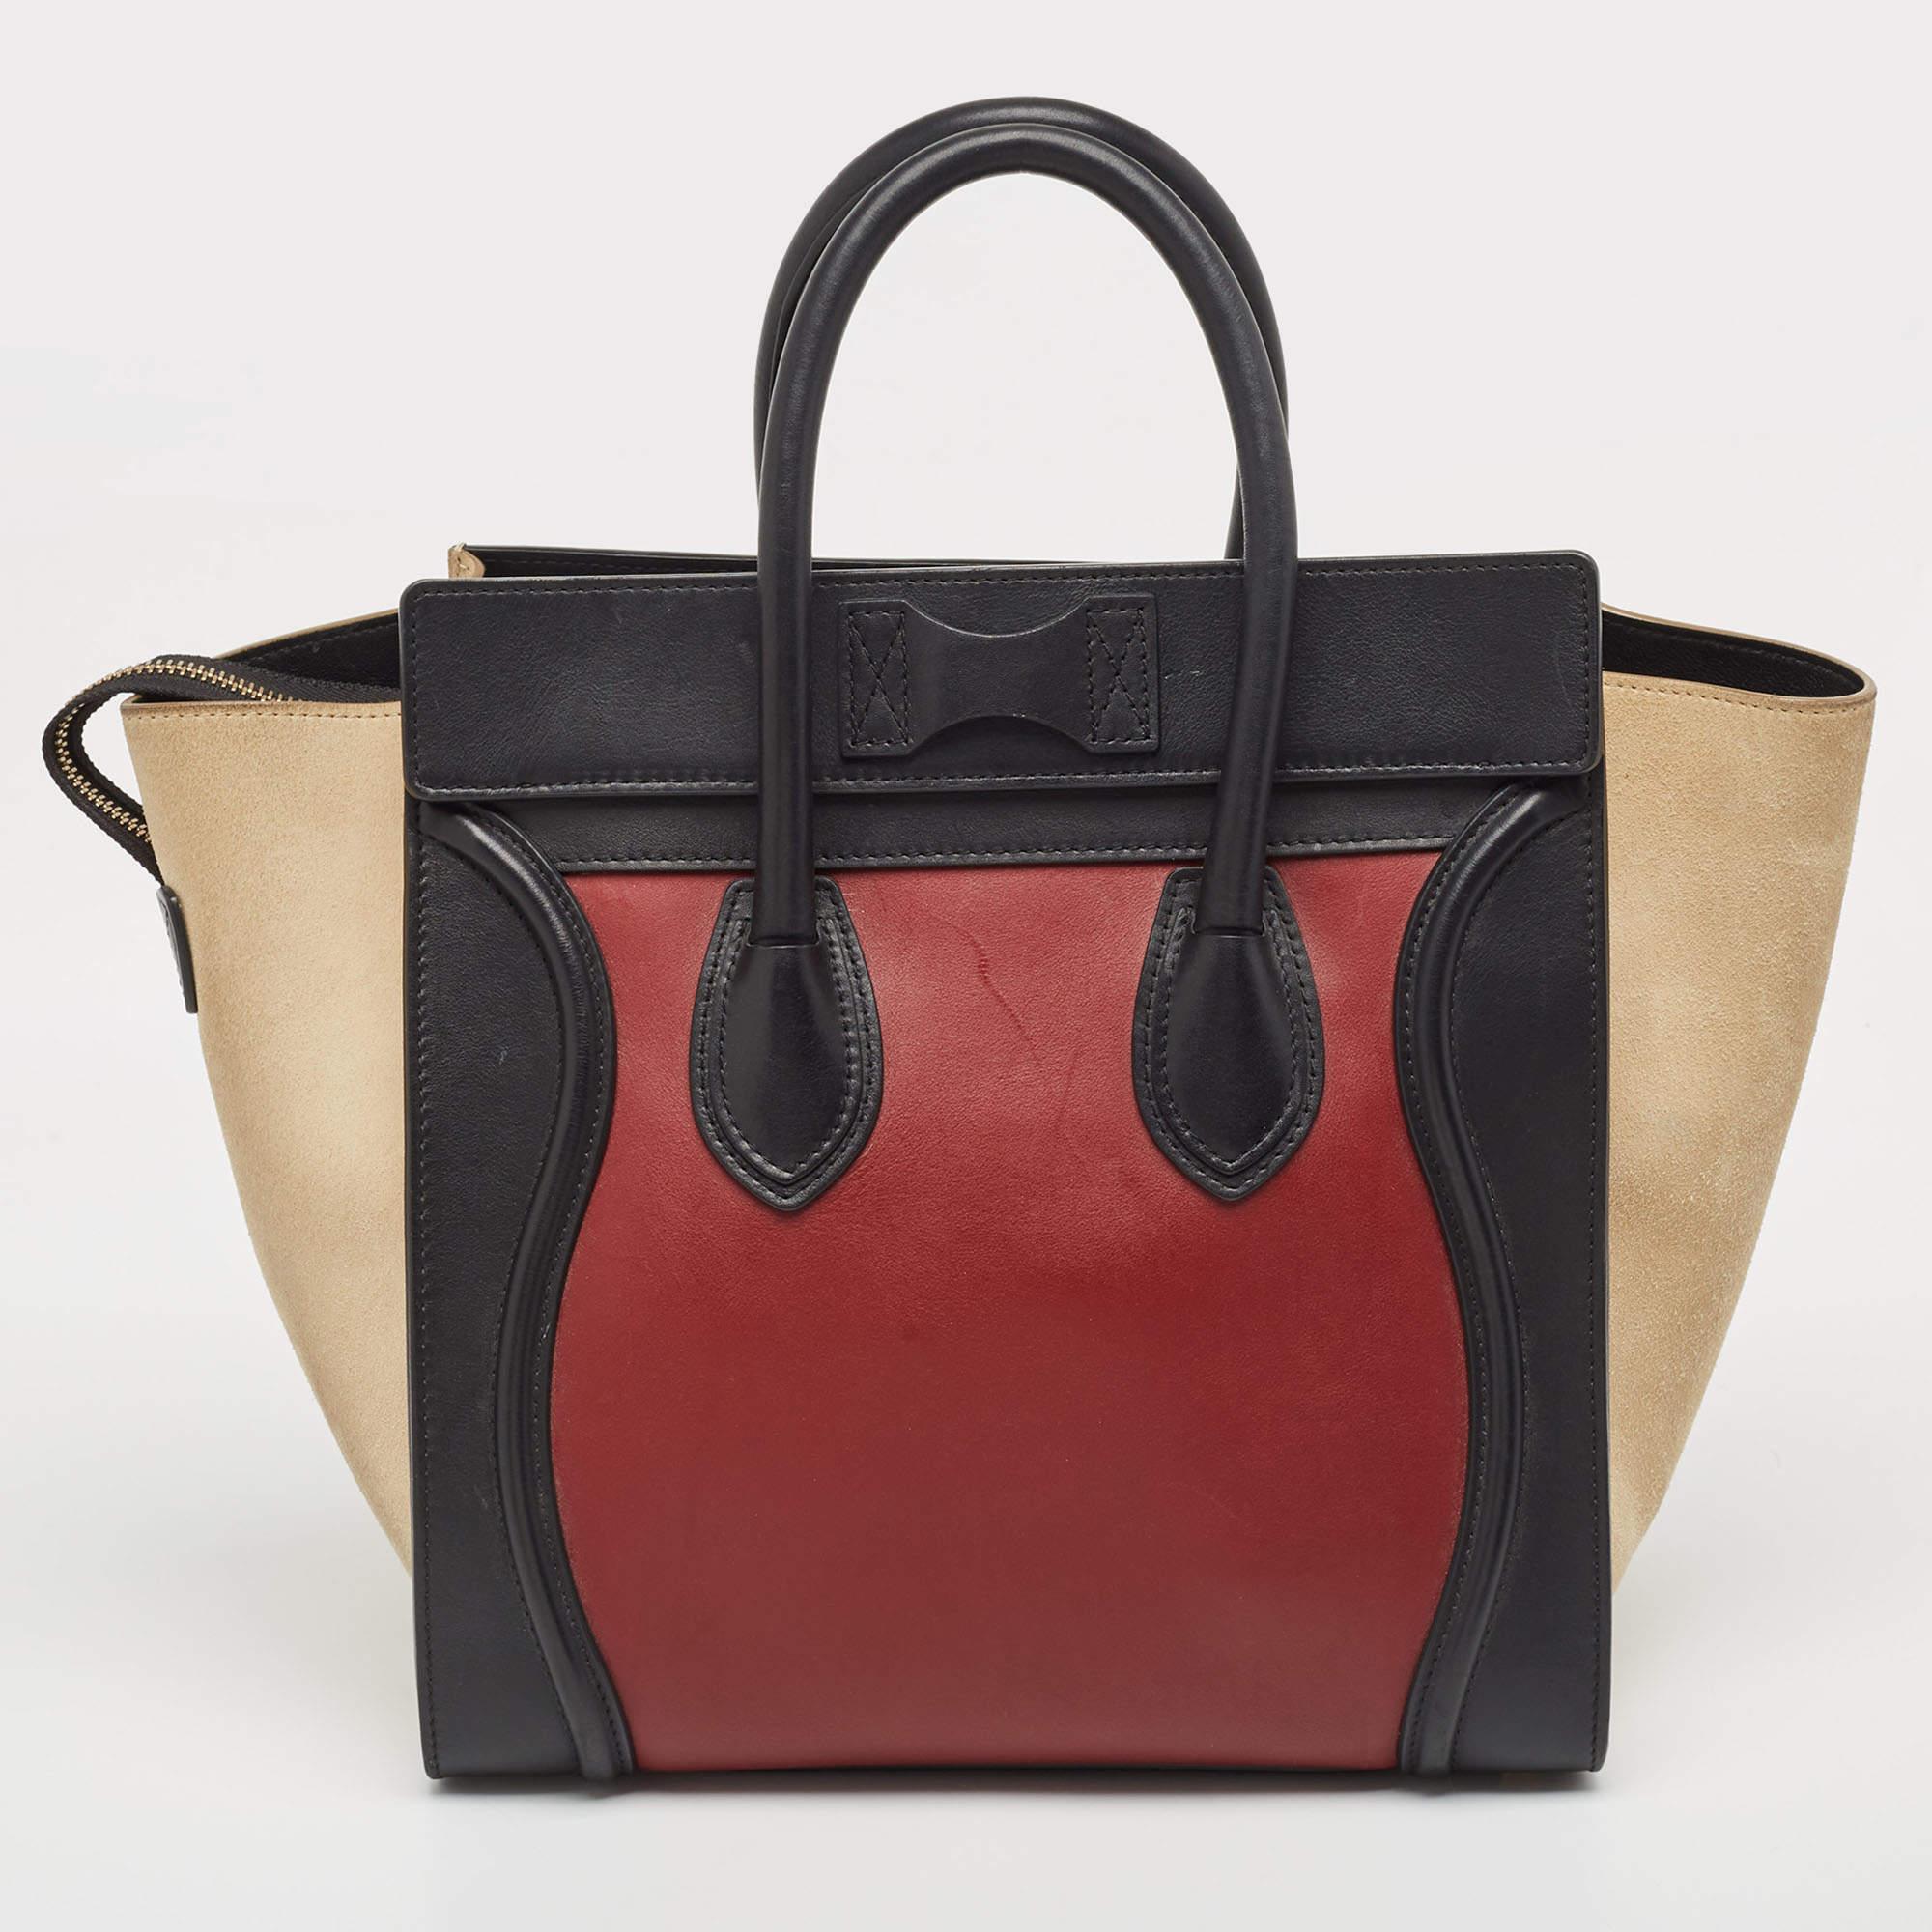 The Celine Luggage Tote exudes elegance with its harmonious blend of textures. Crafted with meticulous attention to detail, it features luxurious leather and sumptuous suede in a tasteful tricolor design. Its compact size belies its ample capacity,